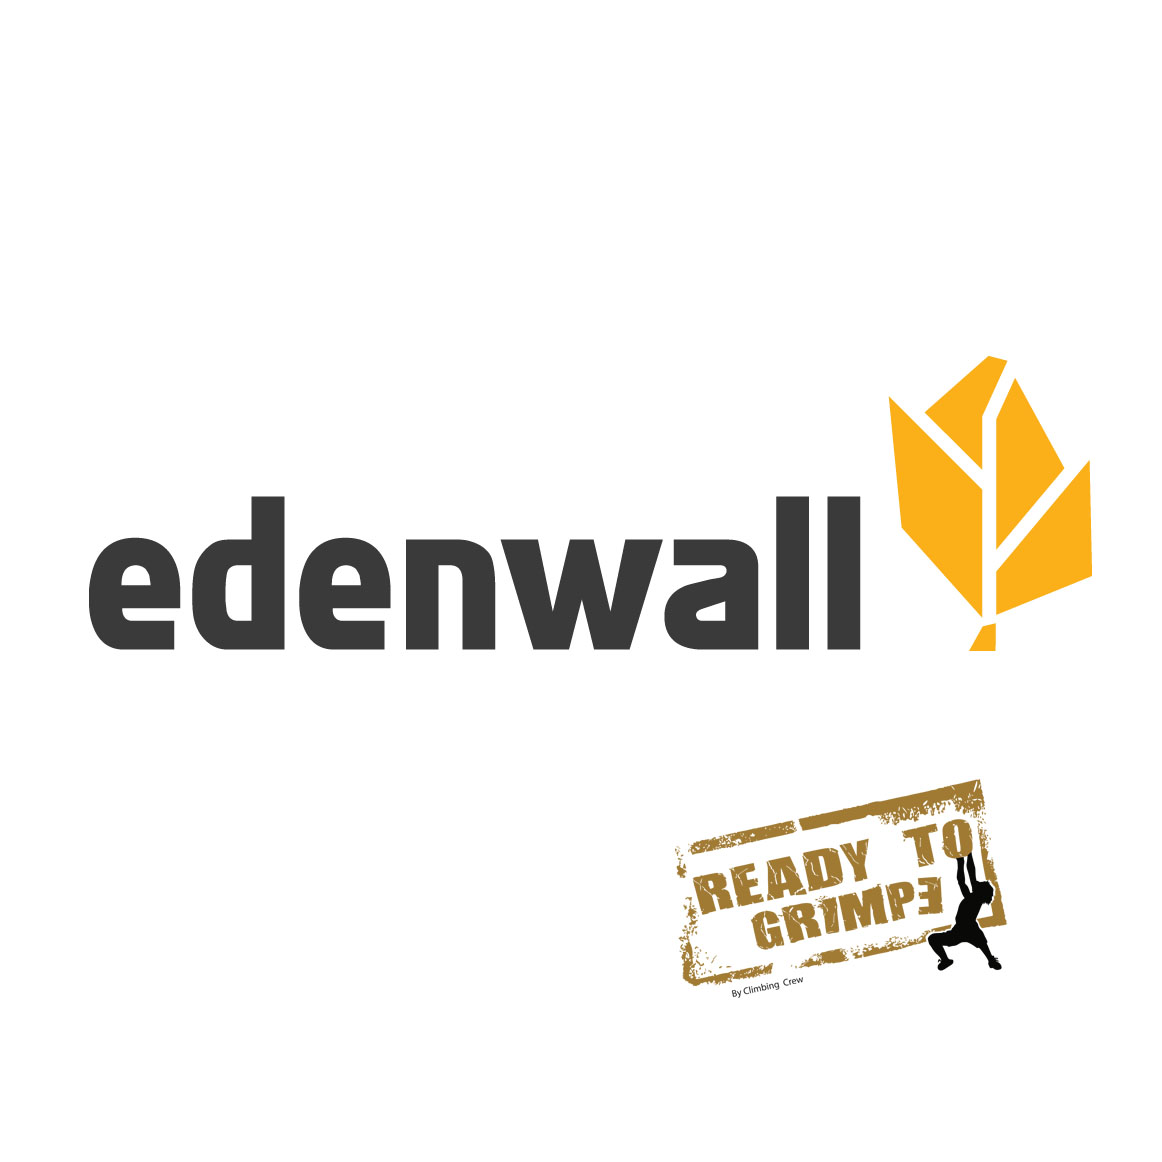 EDENWALL - READY TO GRIMPE